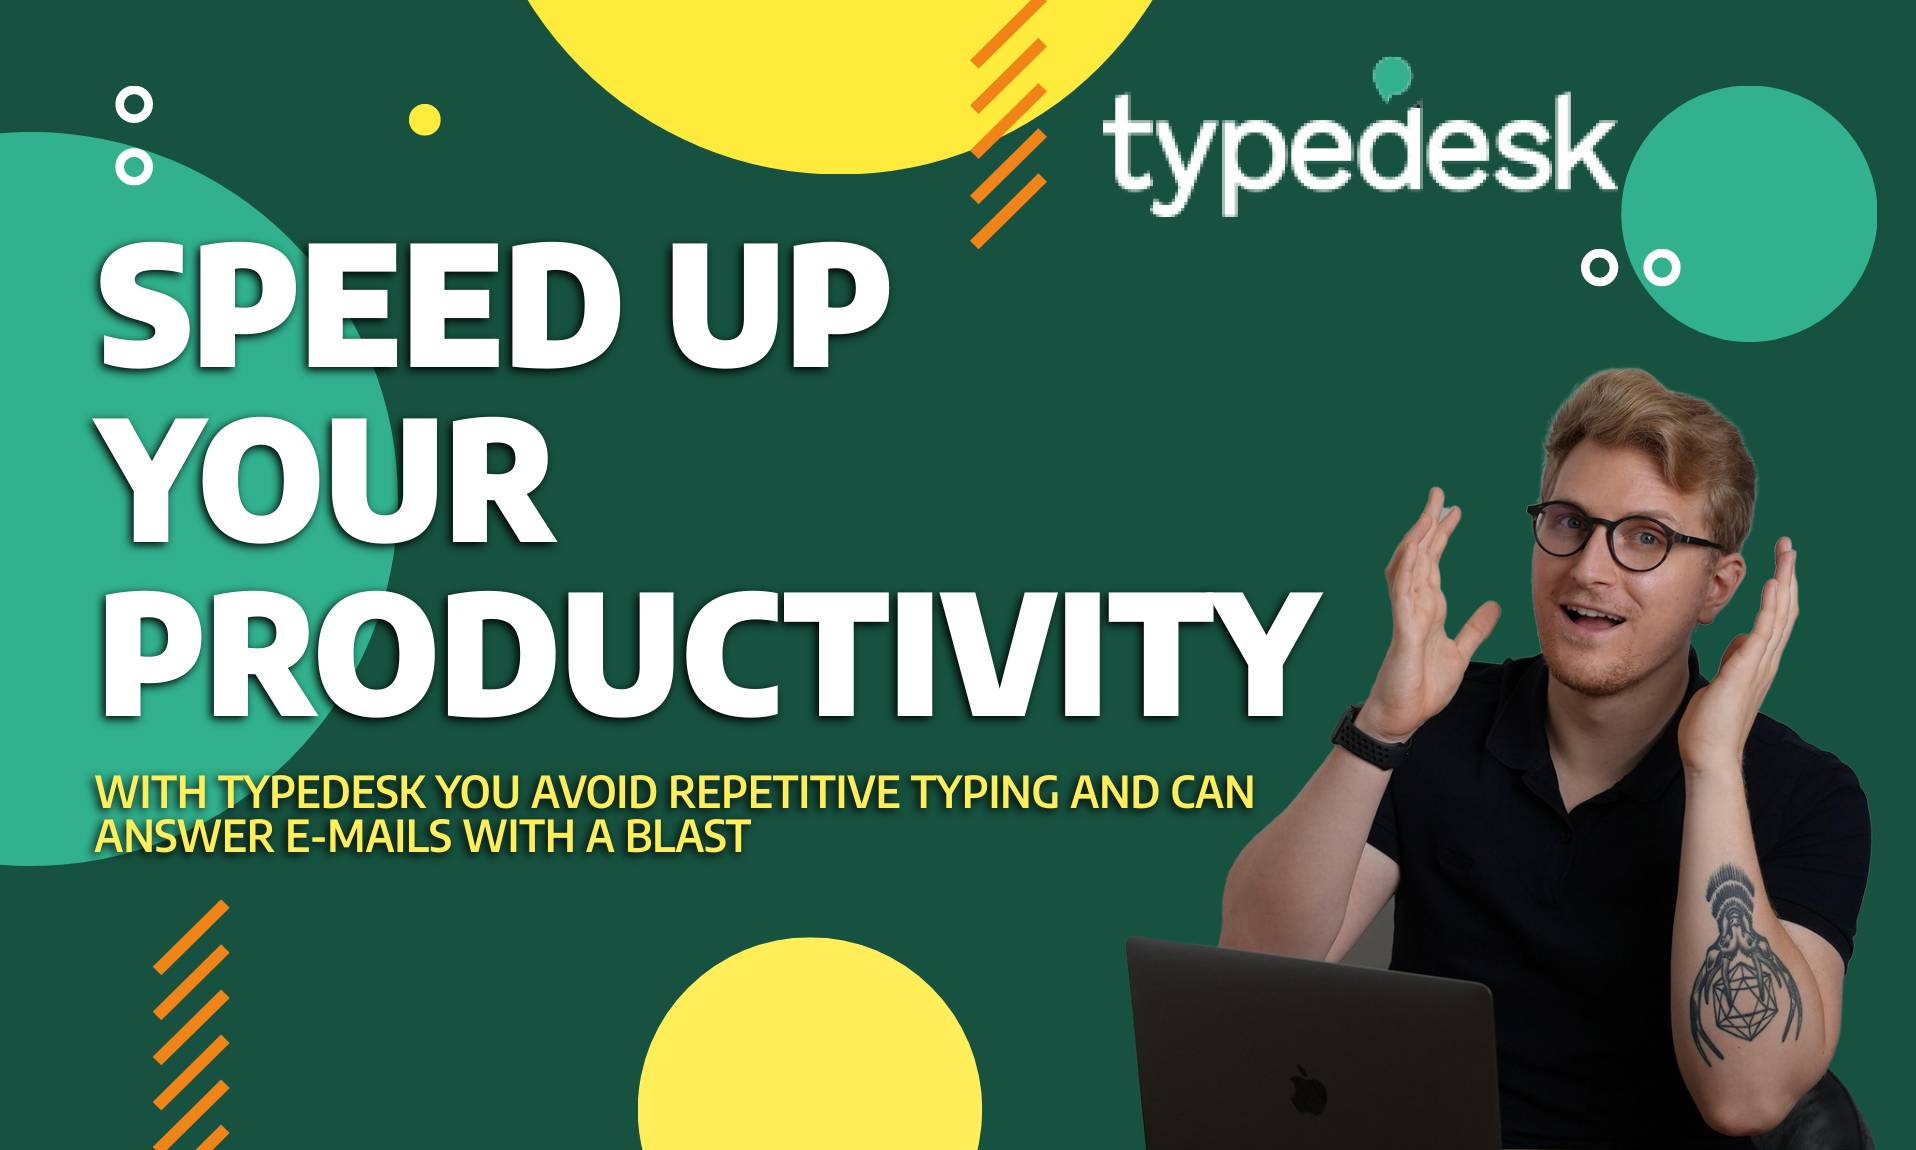 Typedesk - Increase your productivity with this typing tool